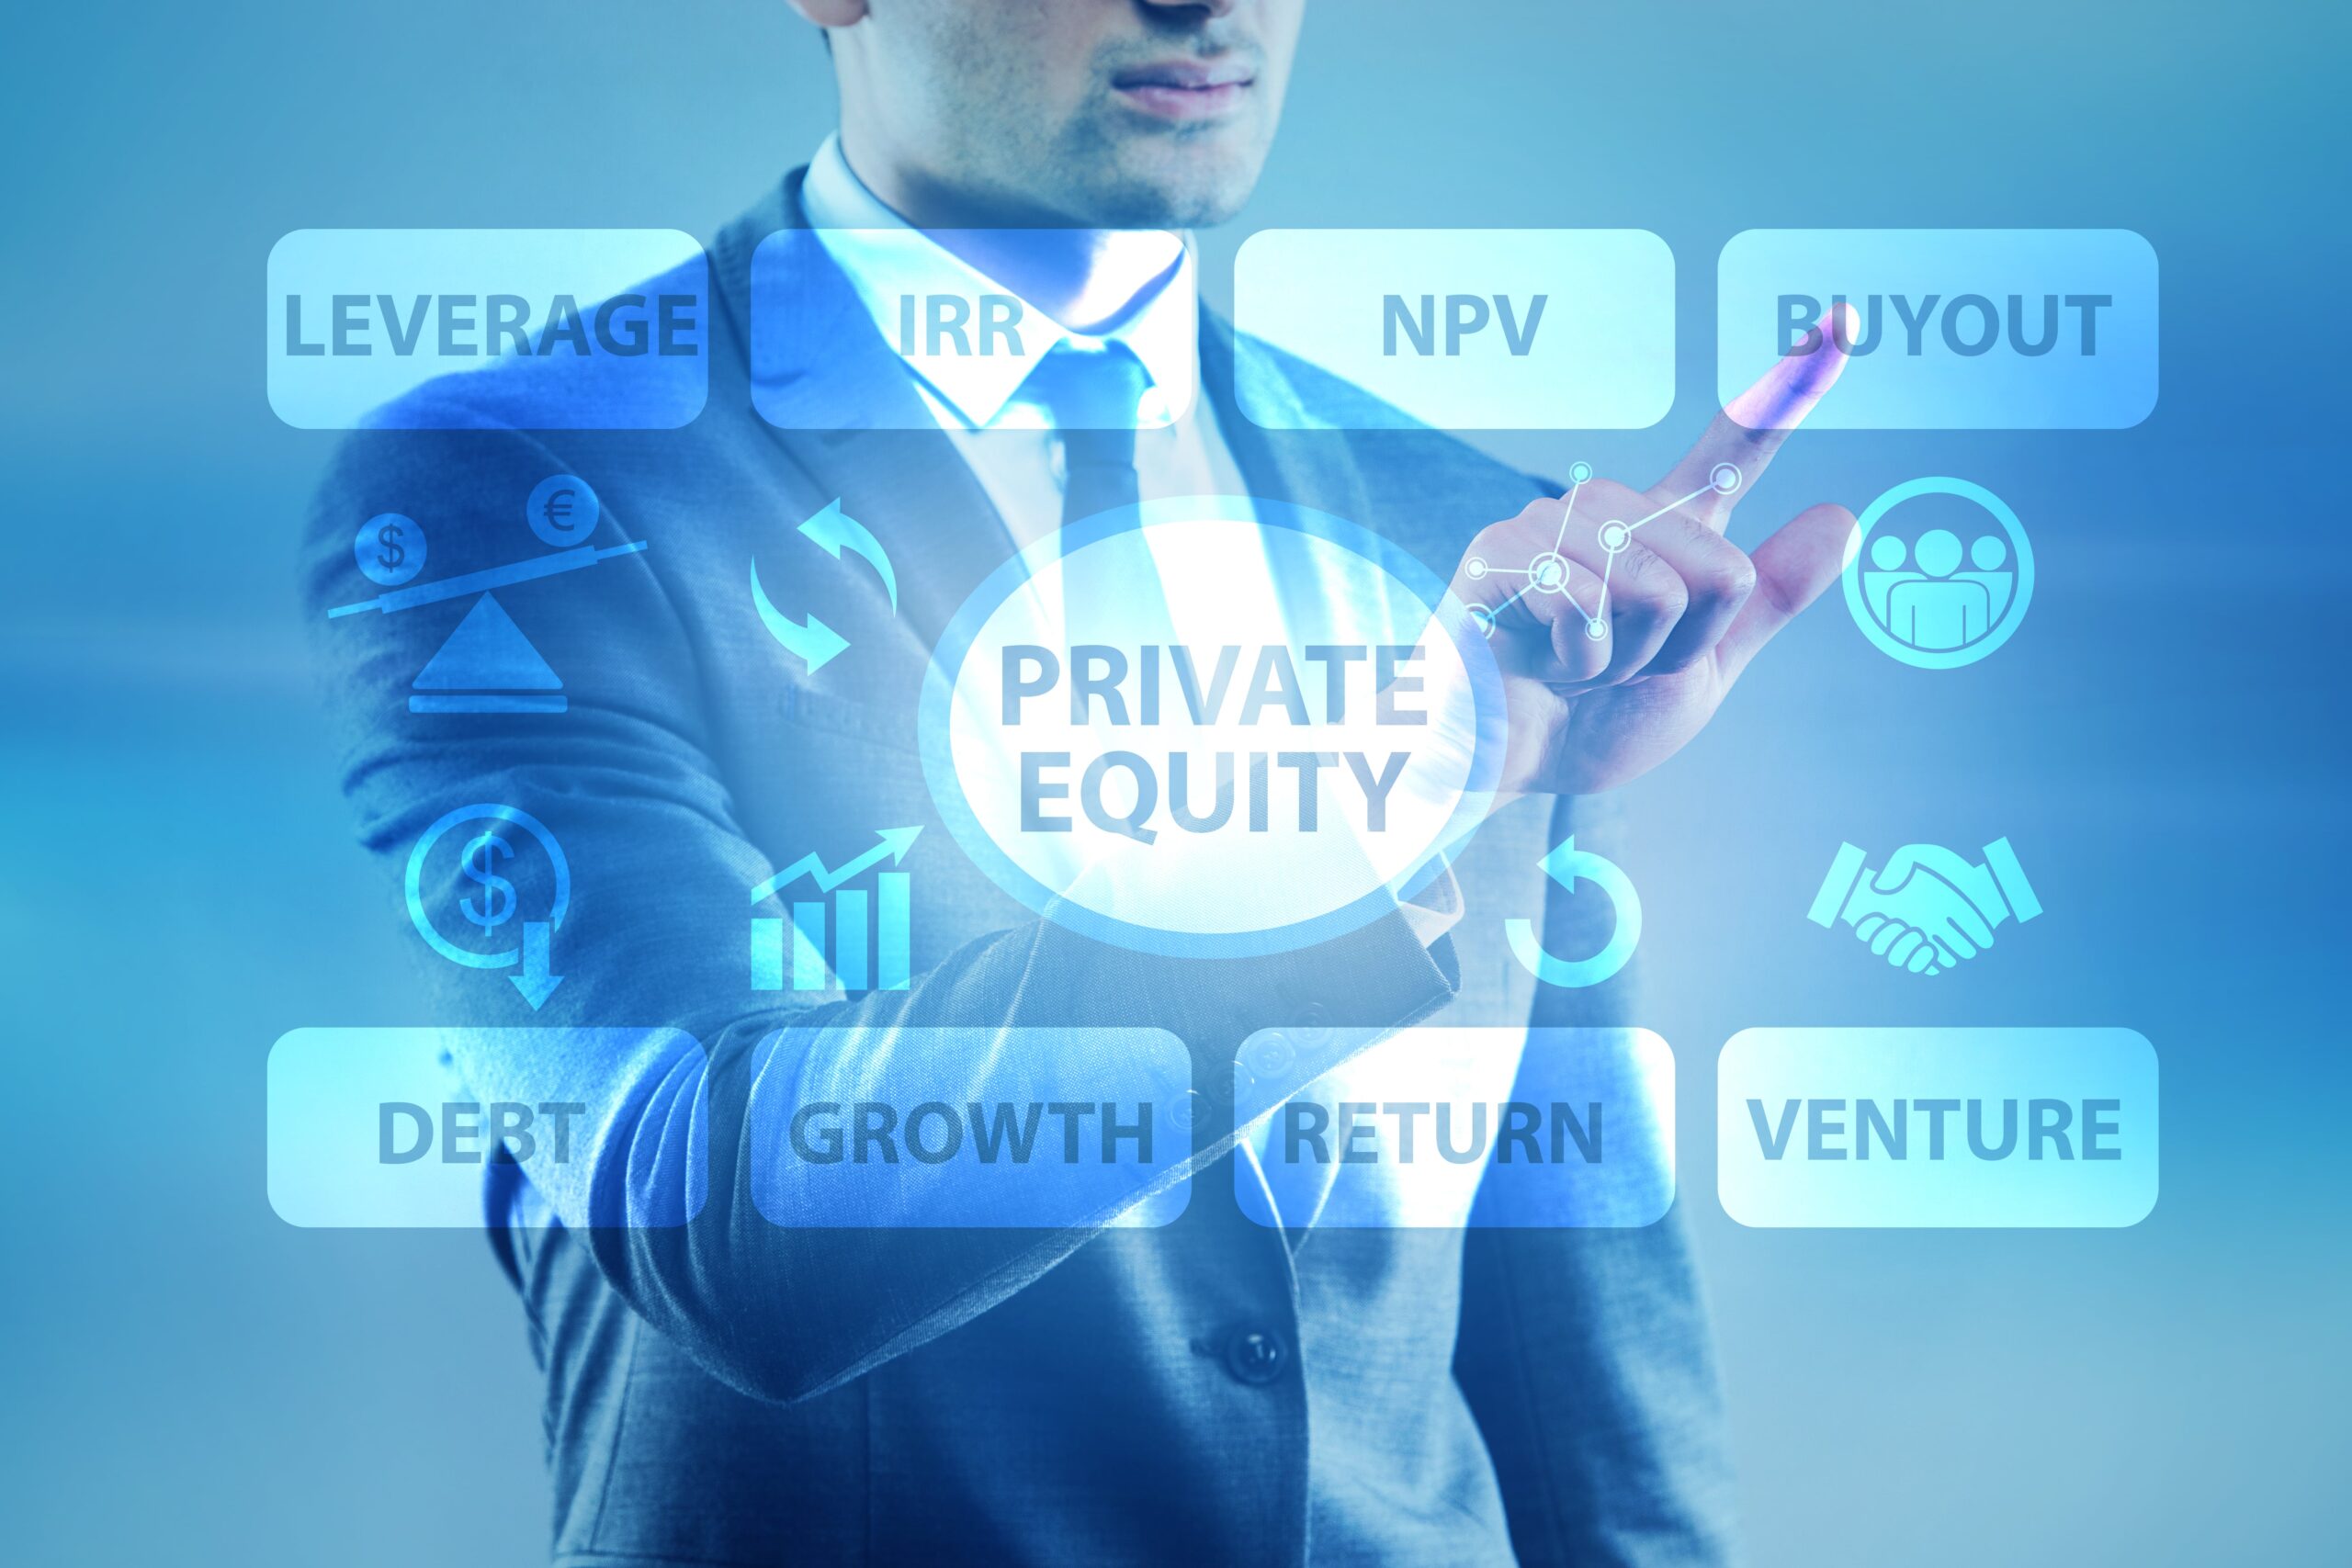 Illustration of a businessman with a graphic overlaid on top of him. The graphic has Private Equity at the center with the words Leverage, IRR, NPV, Buyout, Debt, Growth, Return, and Venture surrounding it.